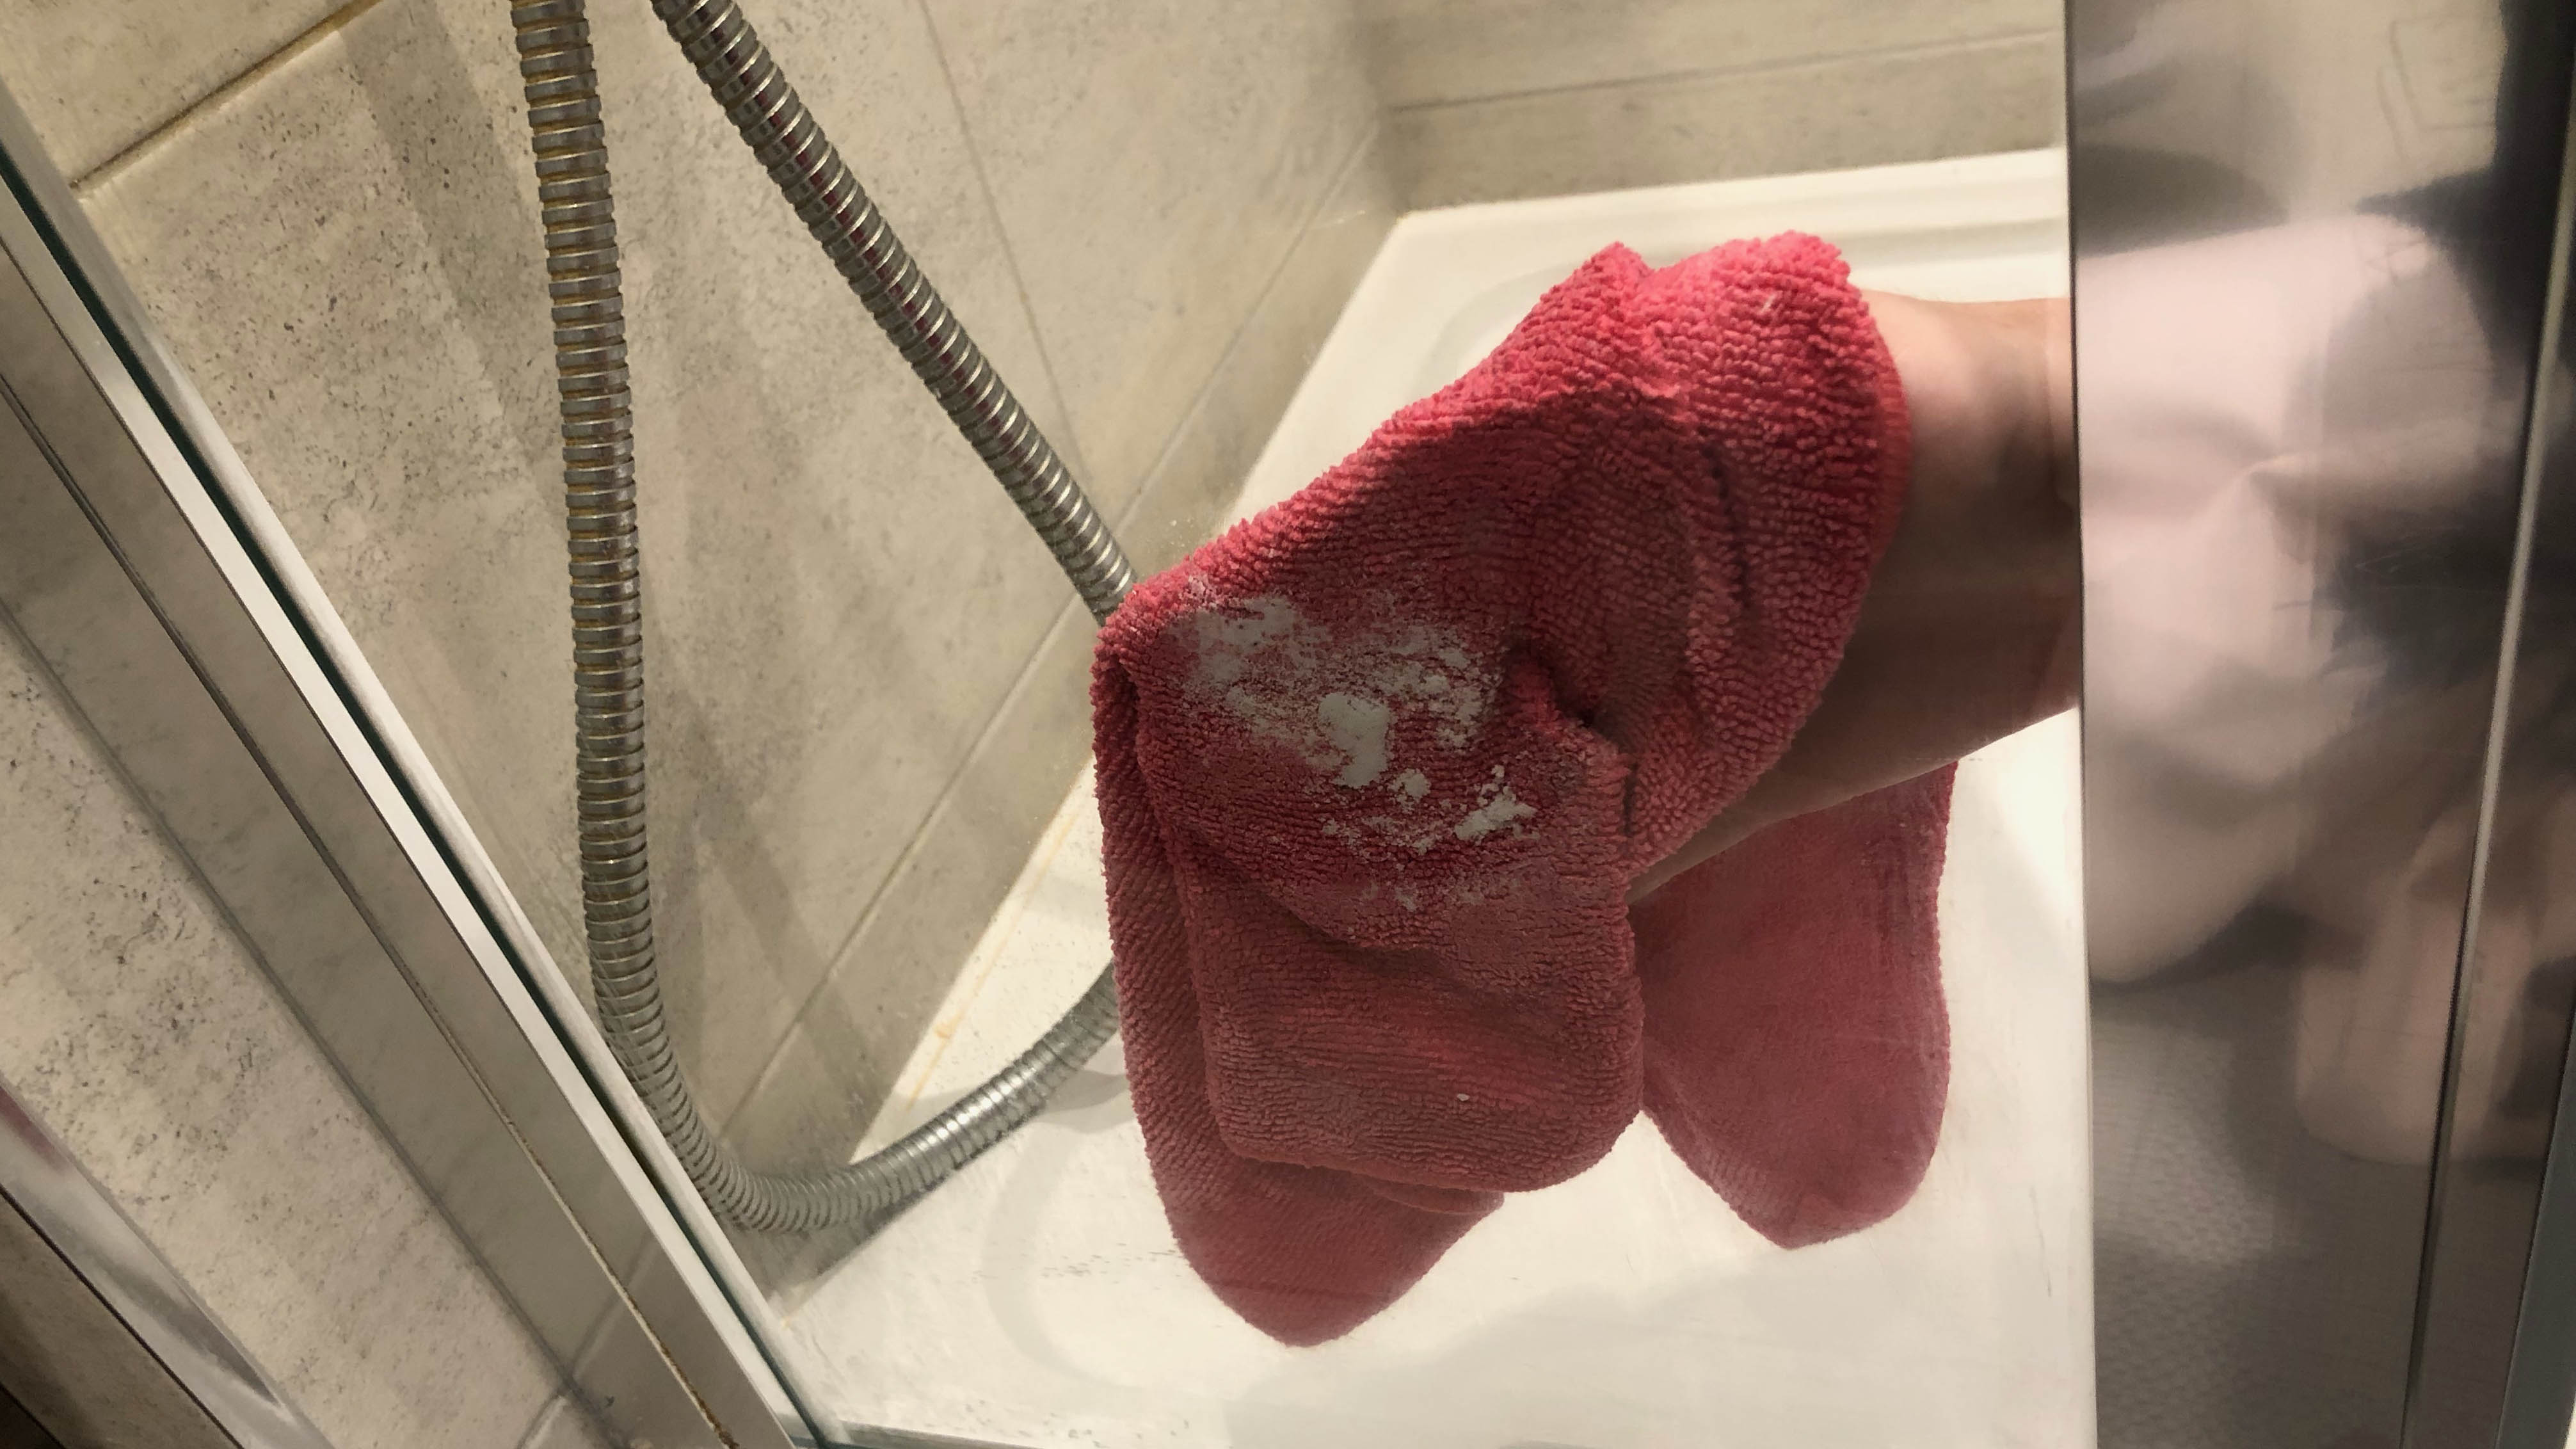 Someone is cleaning a glass shower panel with baking soda on a damp microfiber cloth.